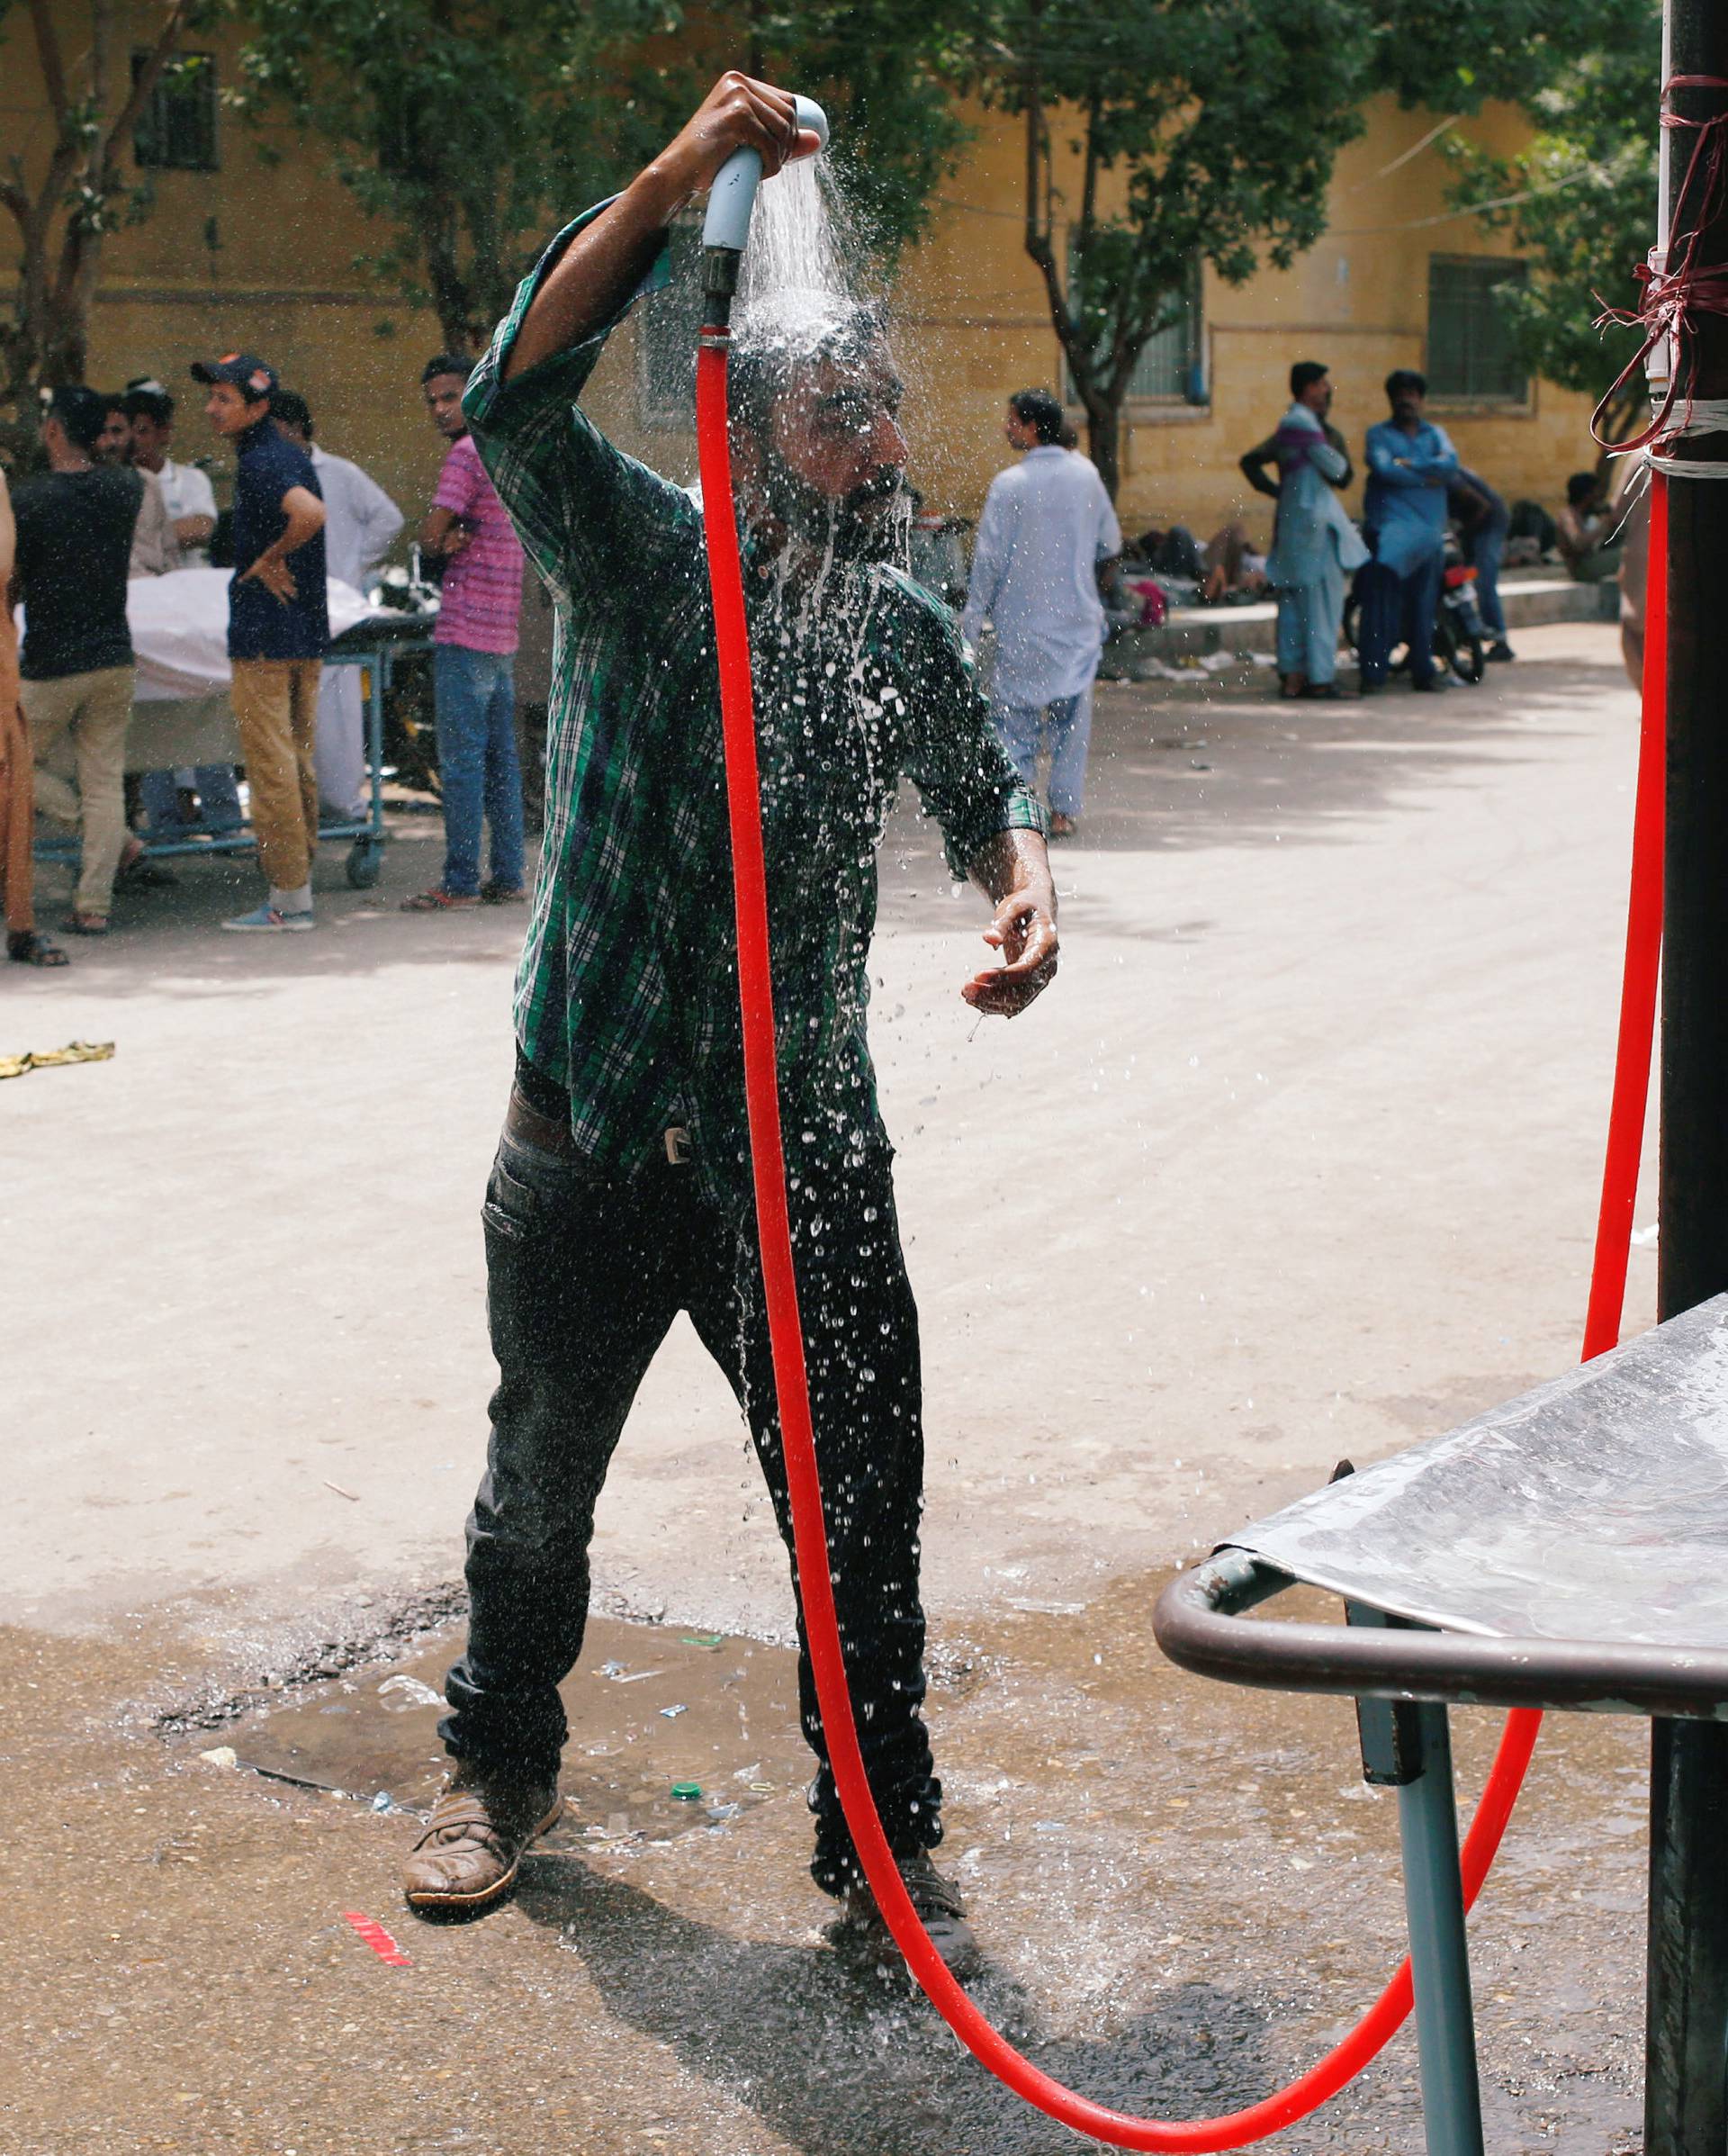 A man cools off with a shower, setup at the premises of the Dr. Ruth K. M. Pfau Civil Hospital, during a heatwave in Karachi